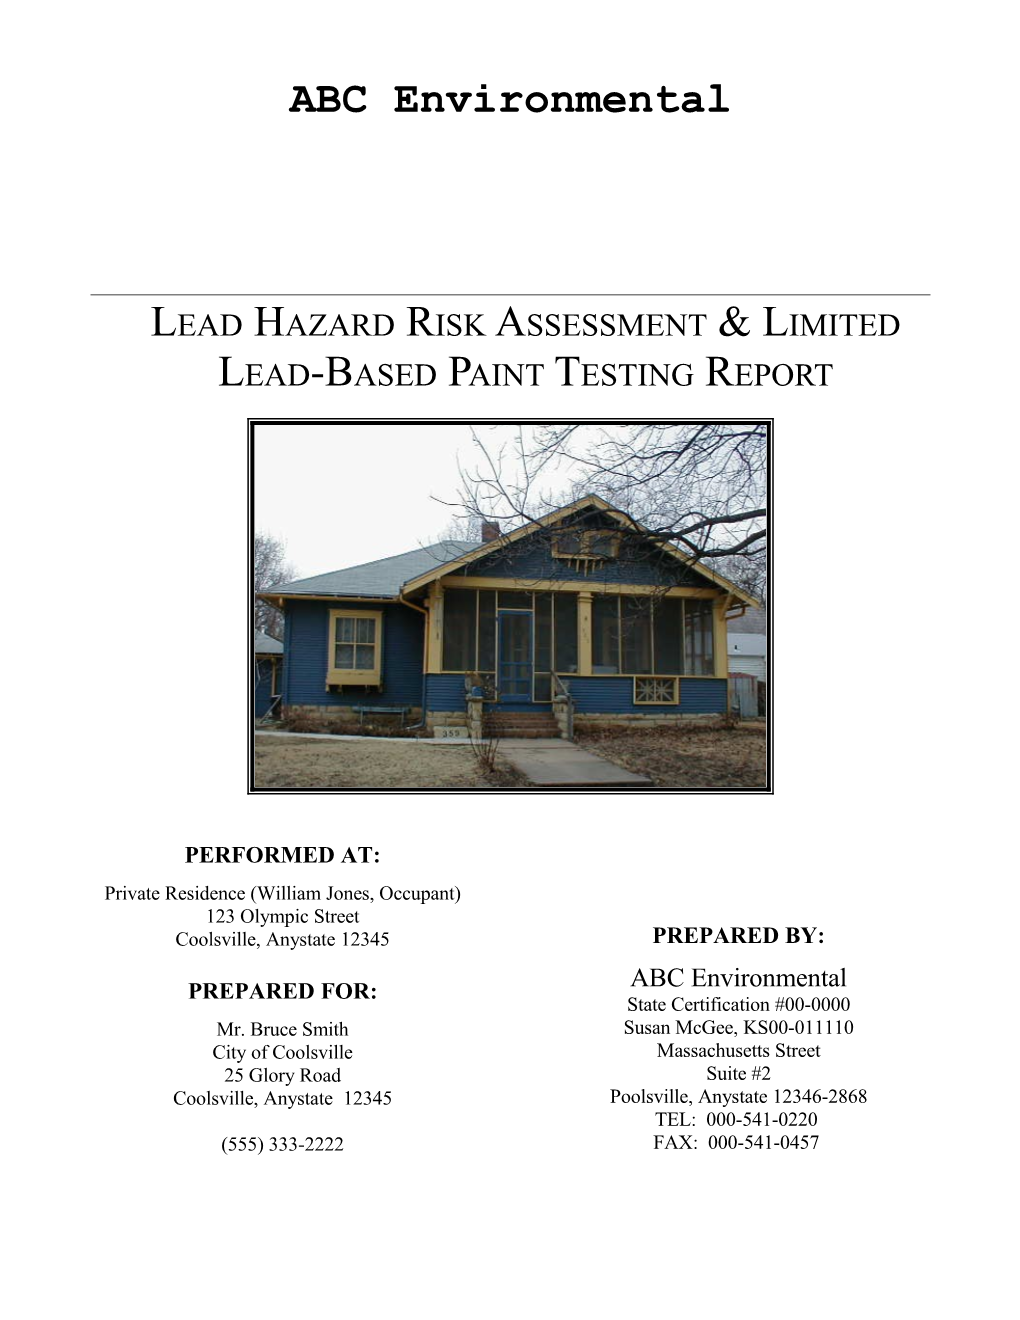 Lead Hazard Risk Assessment & Limited Lead-Based Paint Testing Report